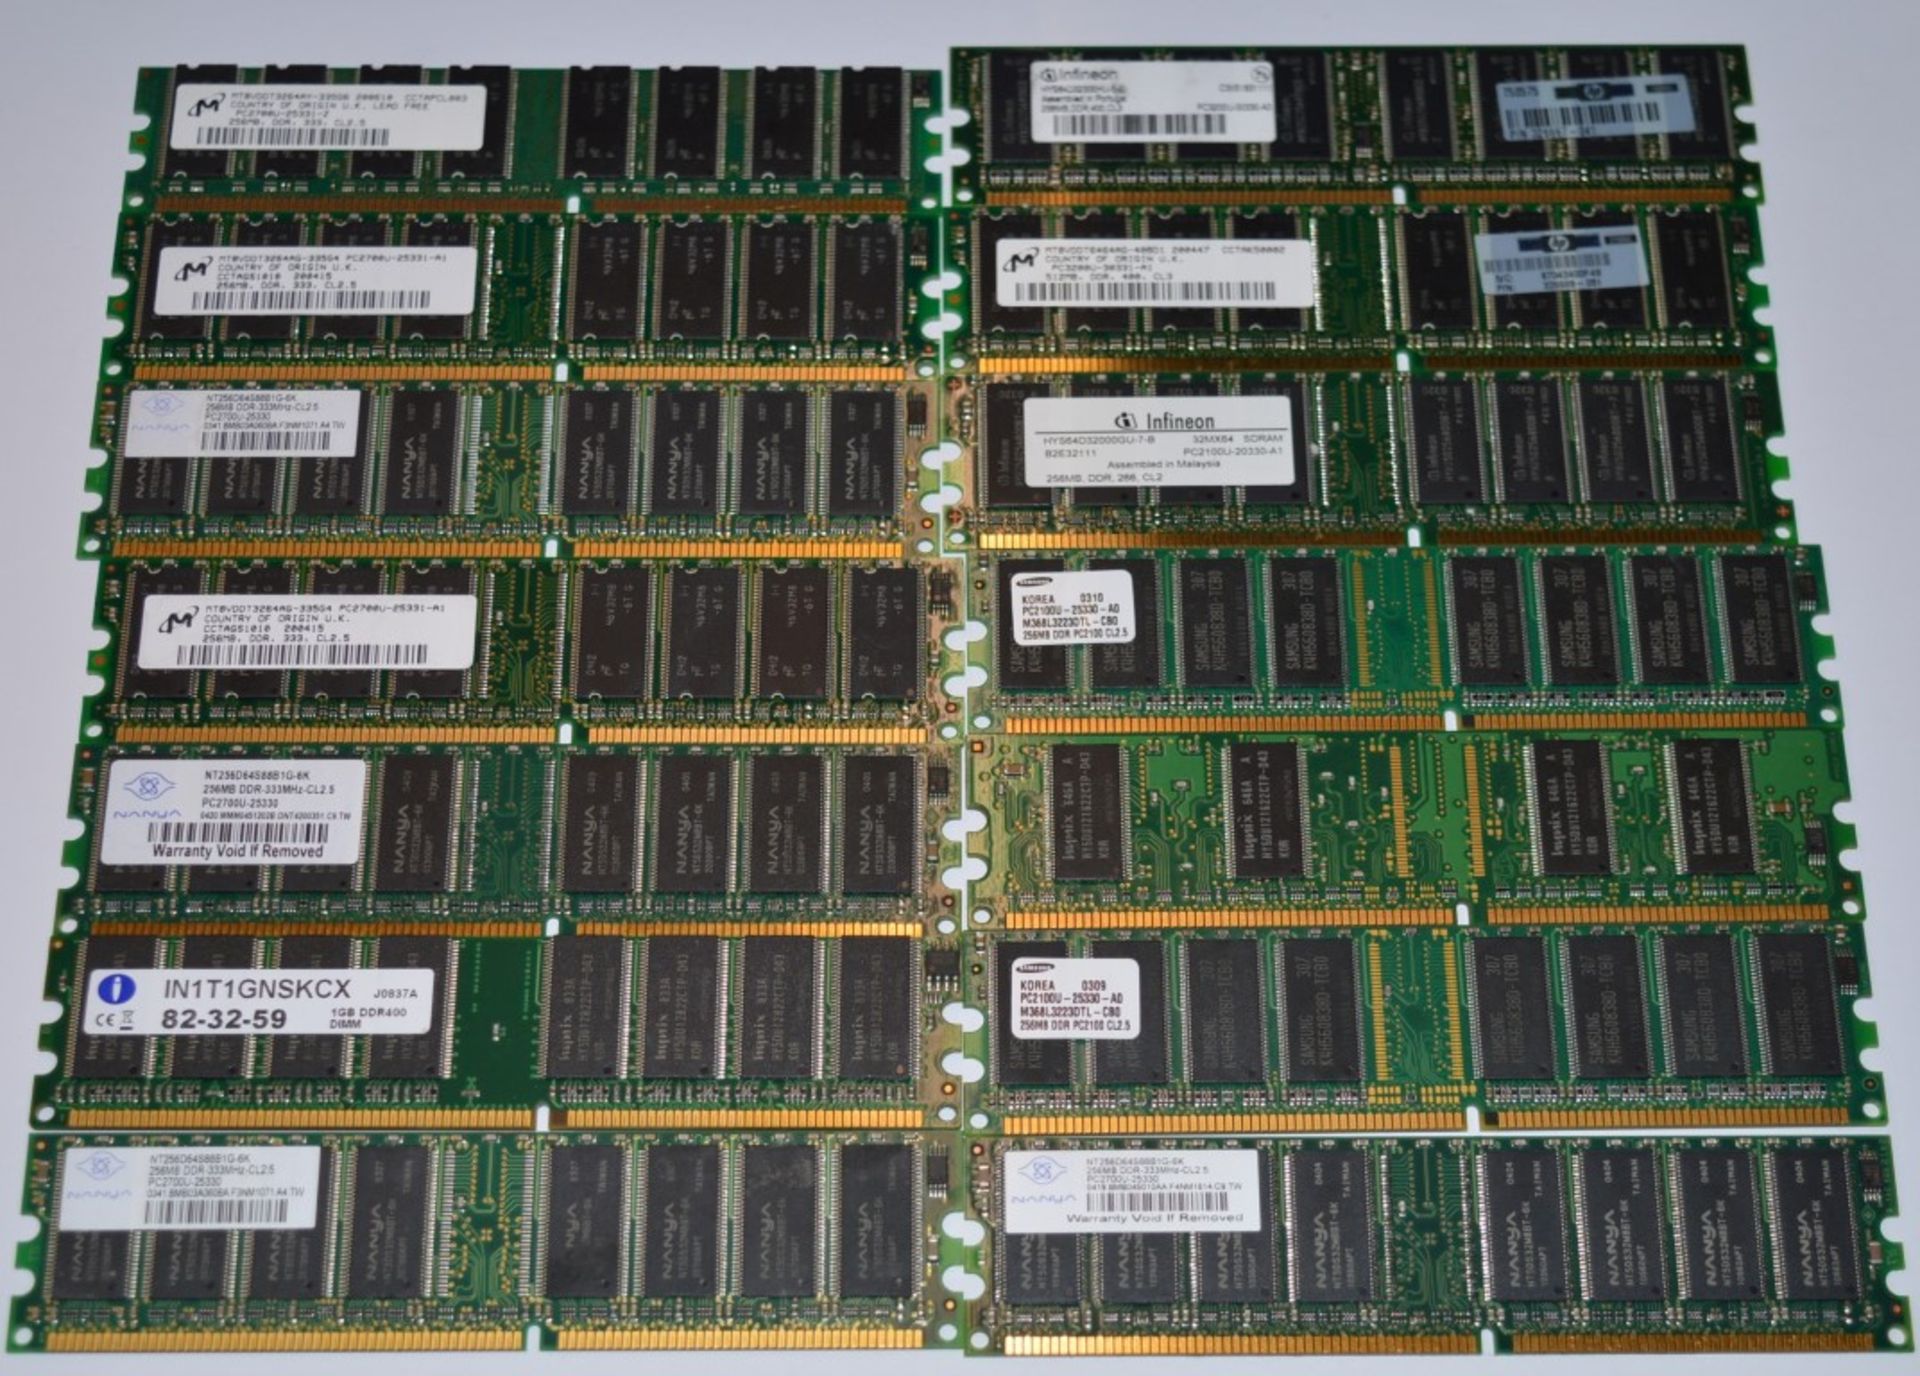 14 x Computer Memory Sticks - 256mb DDR - Various Brands - CL106 - Ref IT011 - Location: